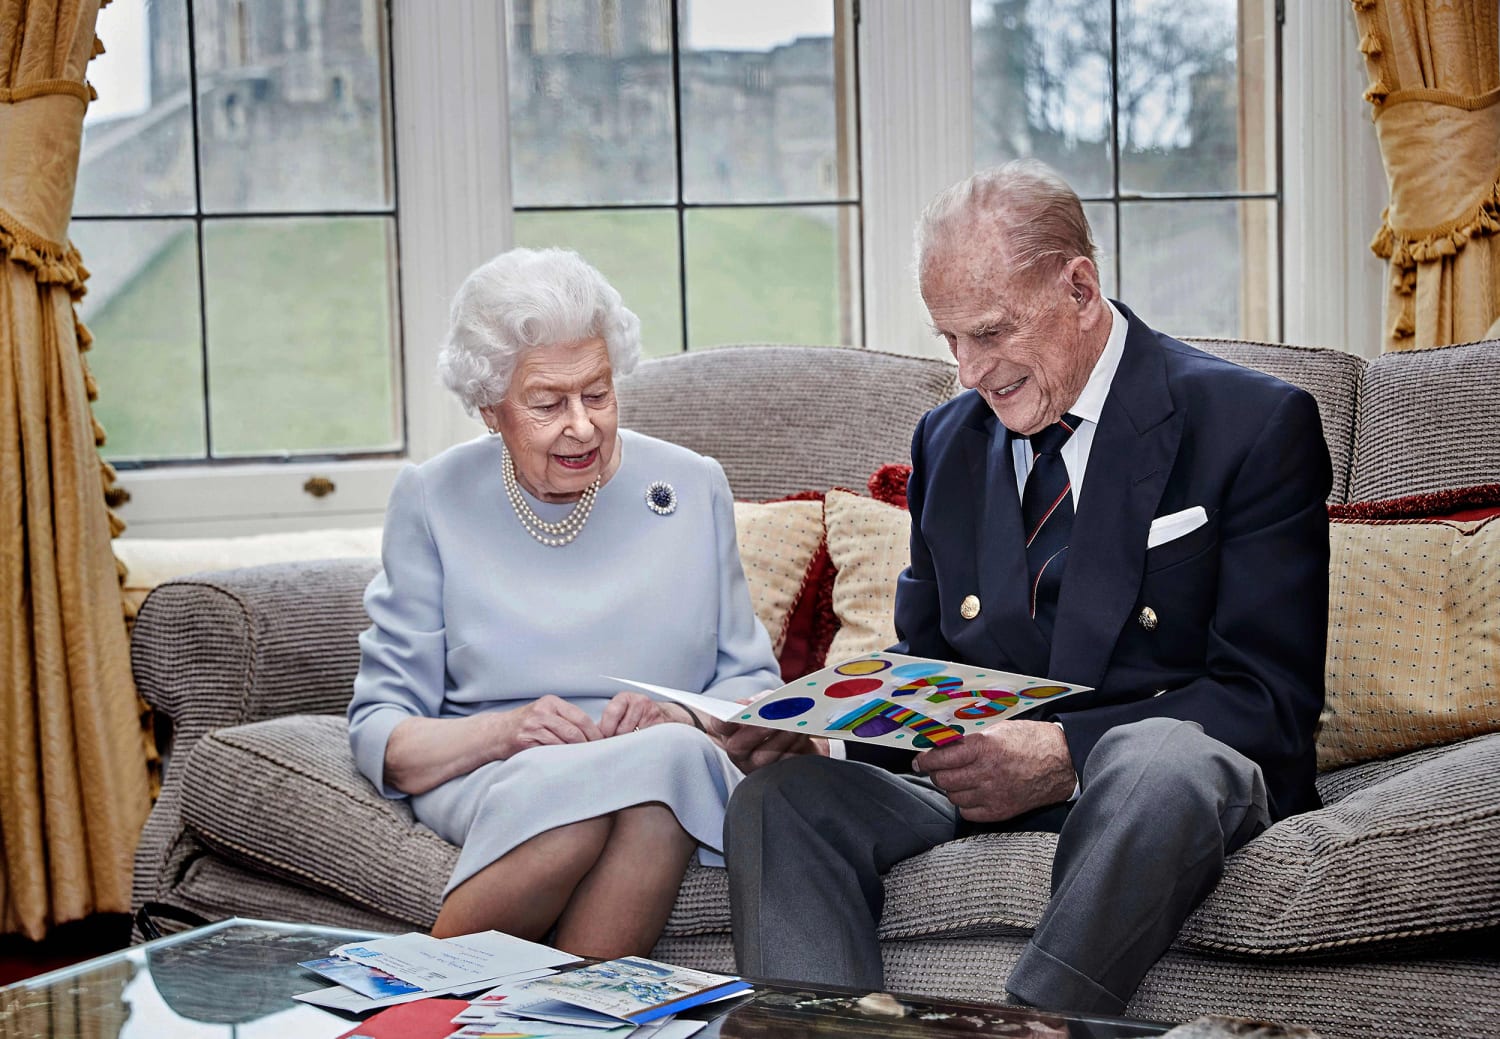 Queen Elizabeth II and Prince Philip The story of their marriage